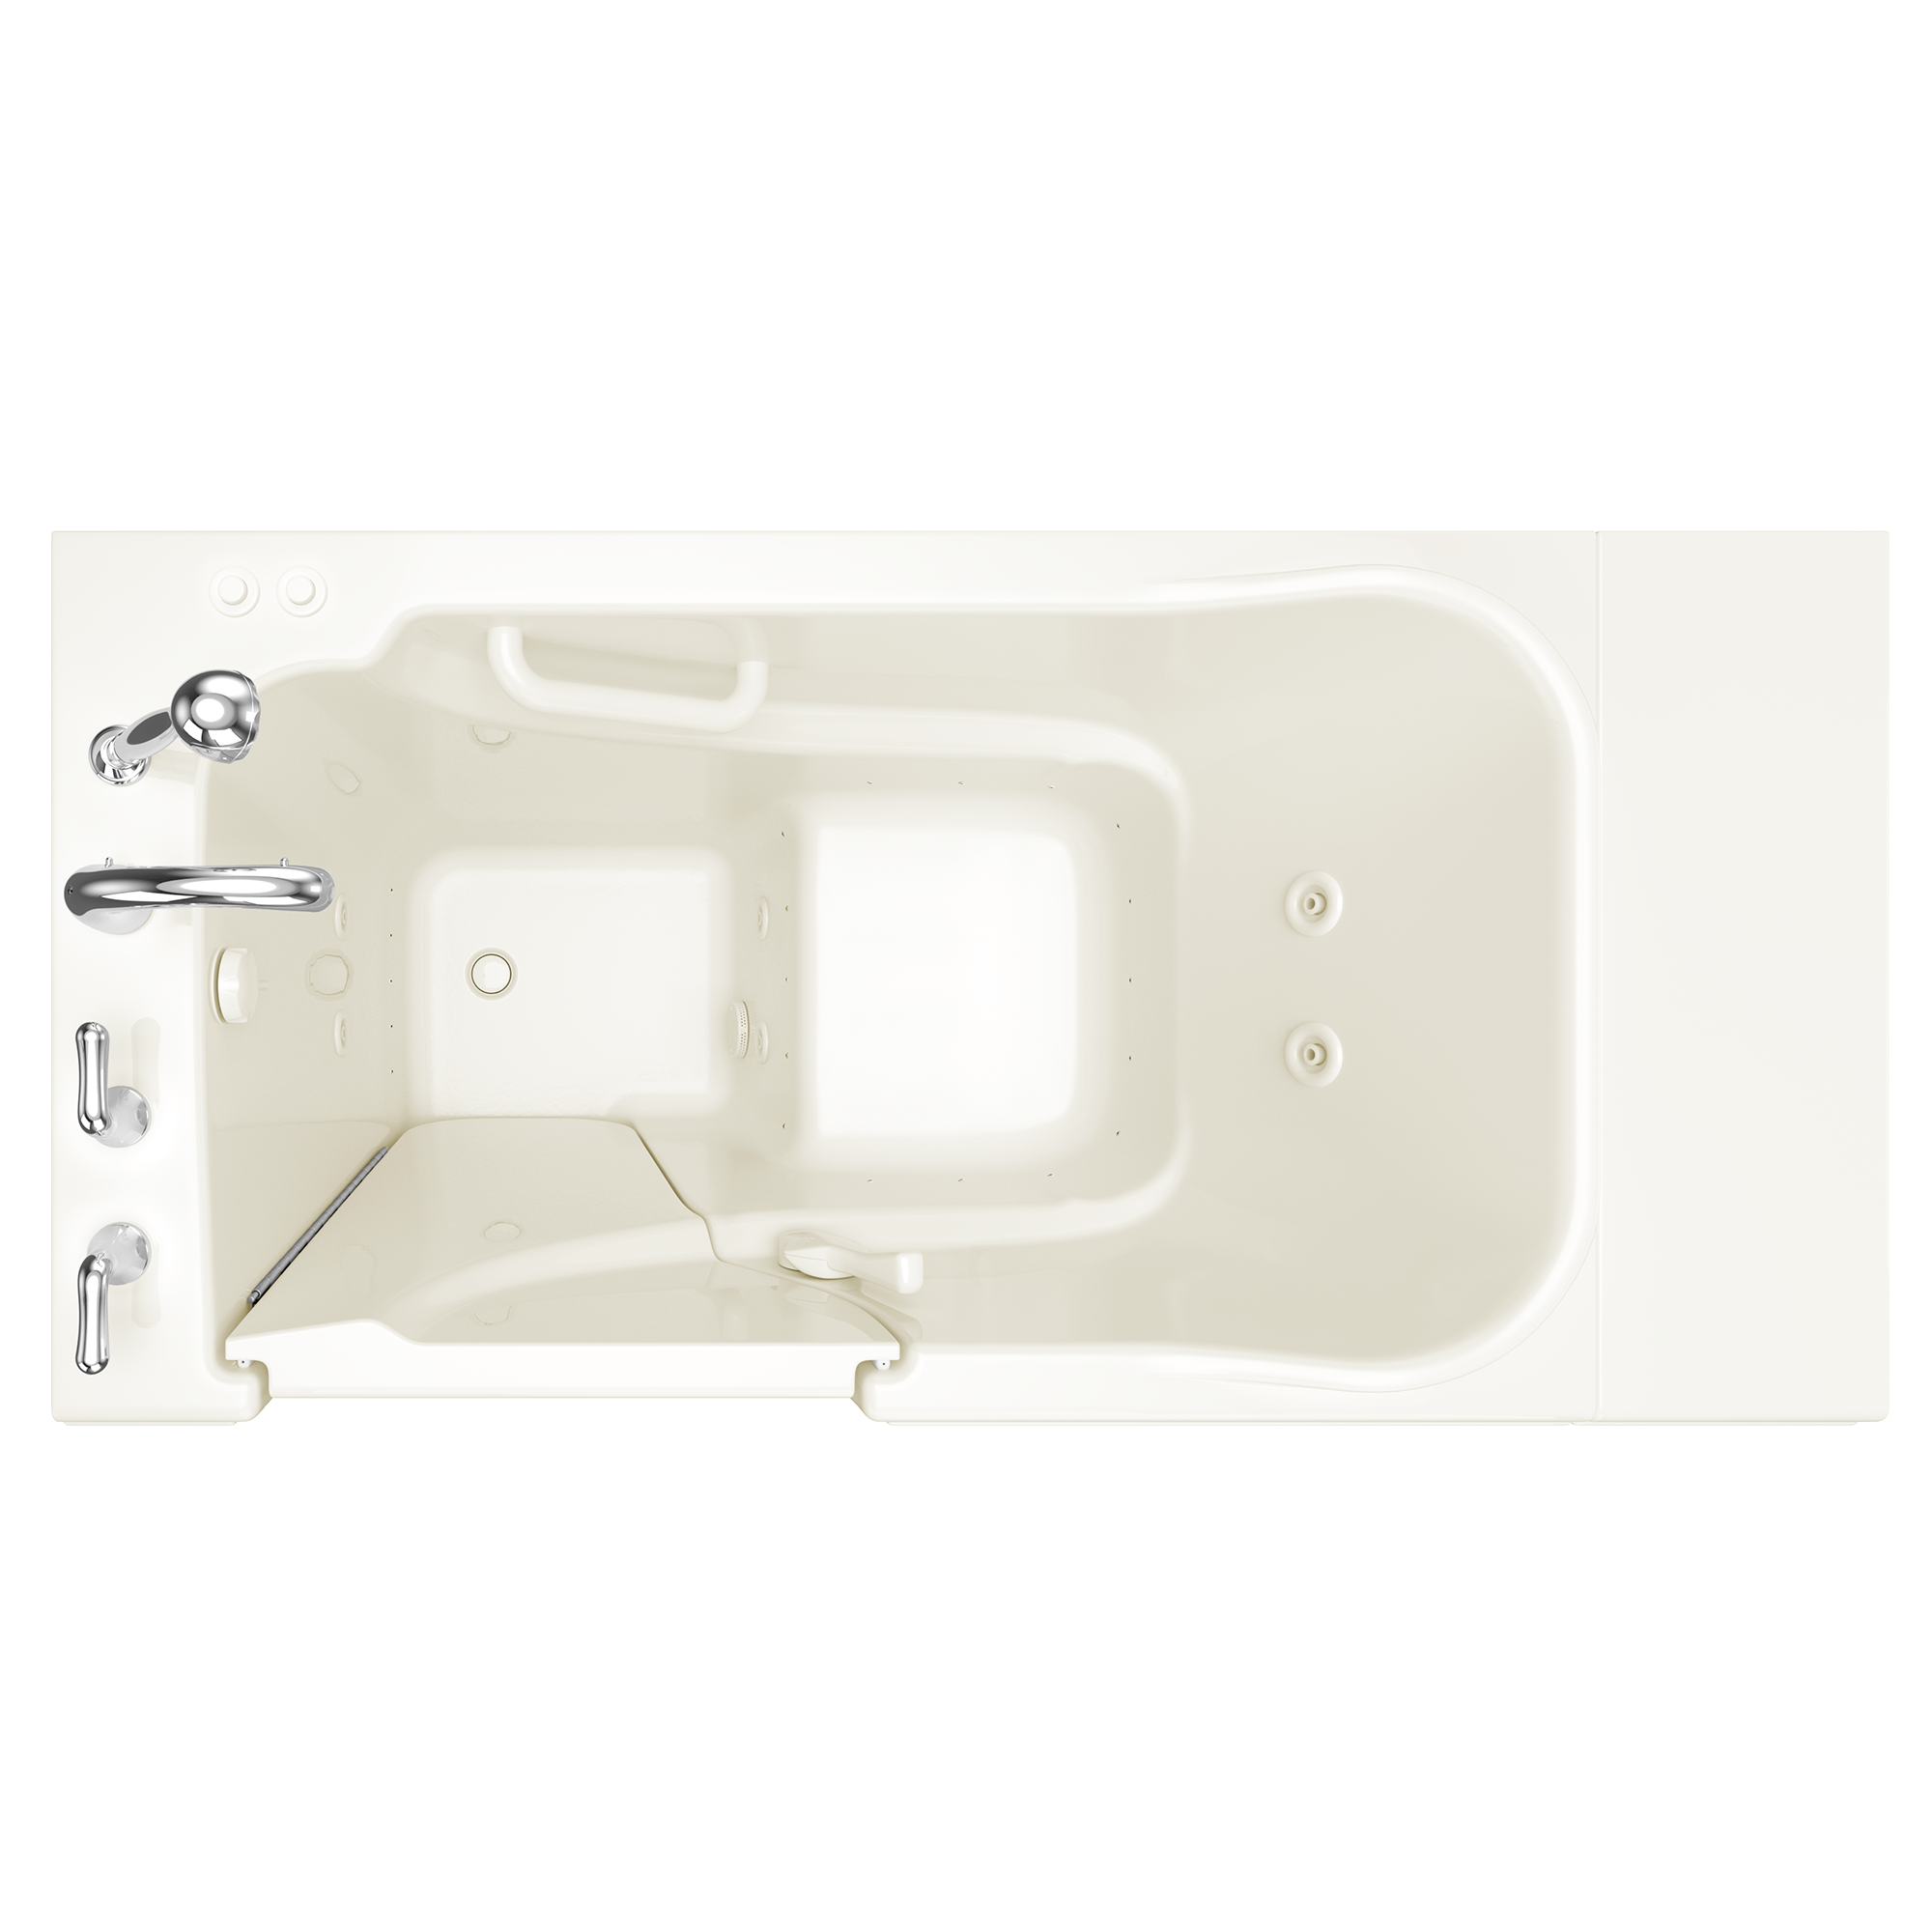 Gelcoat Entry Series 52 x 30 Inch Walk In Tub With Combination Air Spa and Whirlpool Systems - Left Hand Drain With Faucet BISCUIT